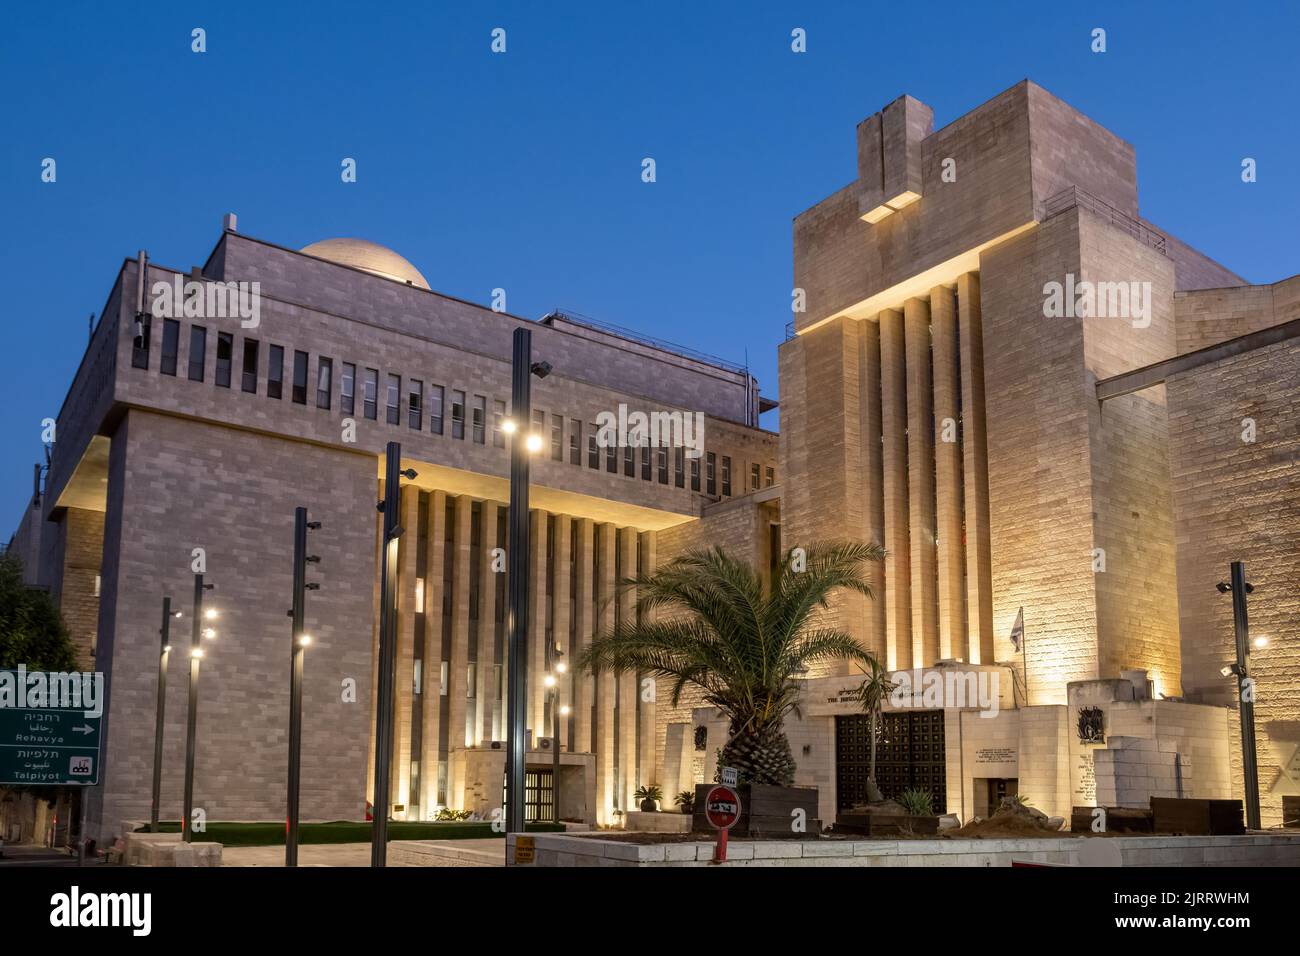 View at twilight of Heichal Shlomo the former seat of the Chief Rabbinate of Israel and currently a museum located adjacent to the Great Synagogue of Jerusalem on 56 King George Street, West Jerusalem, Israel Stock Photo